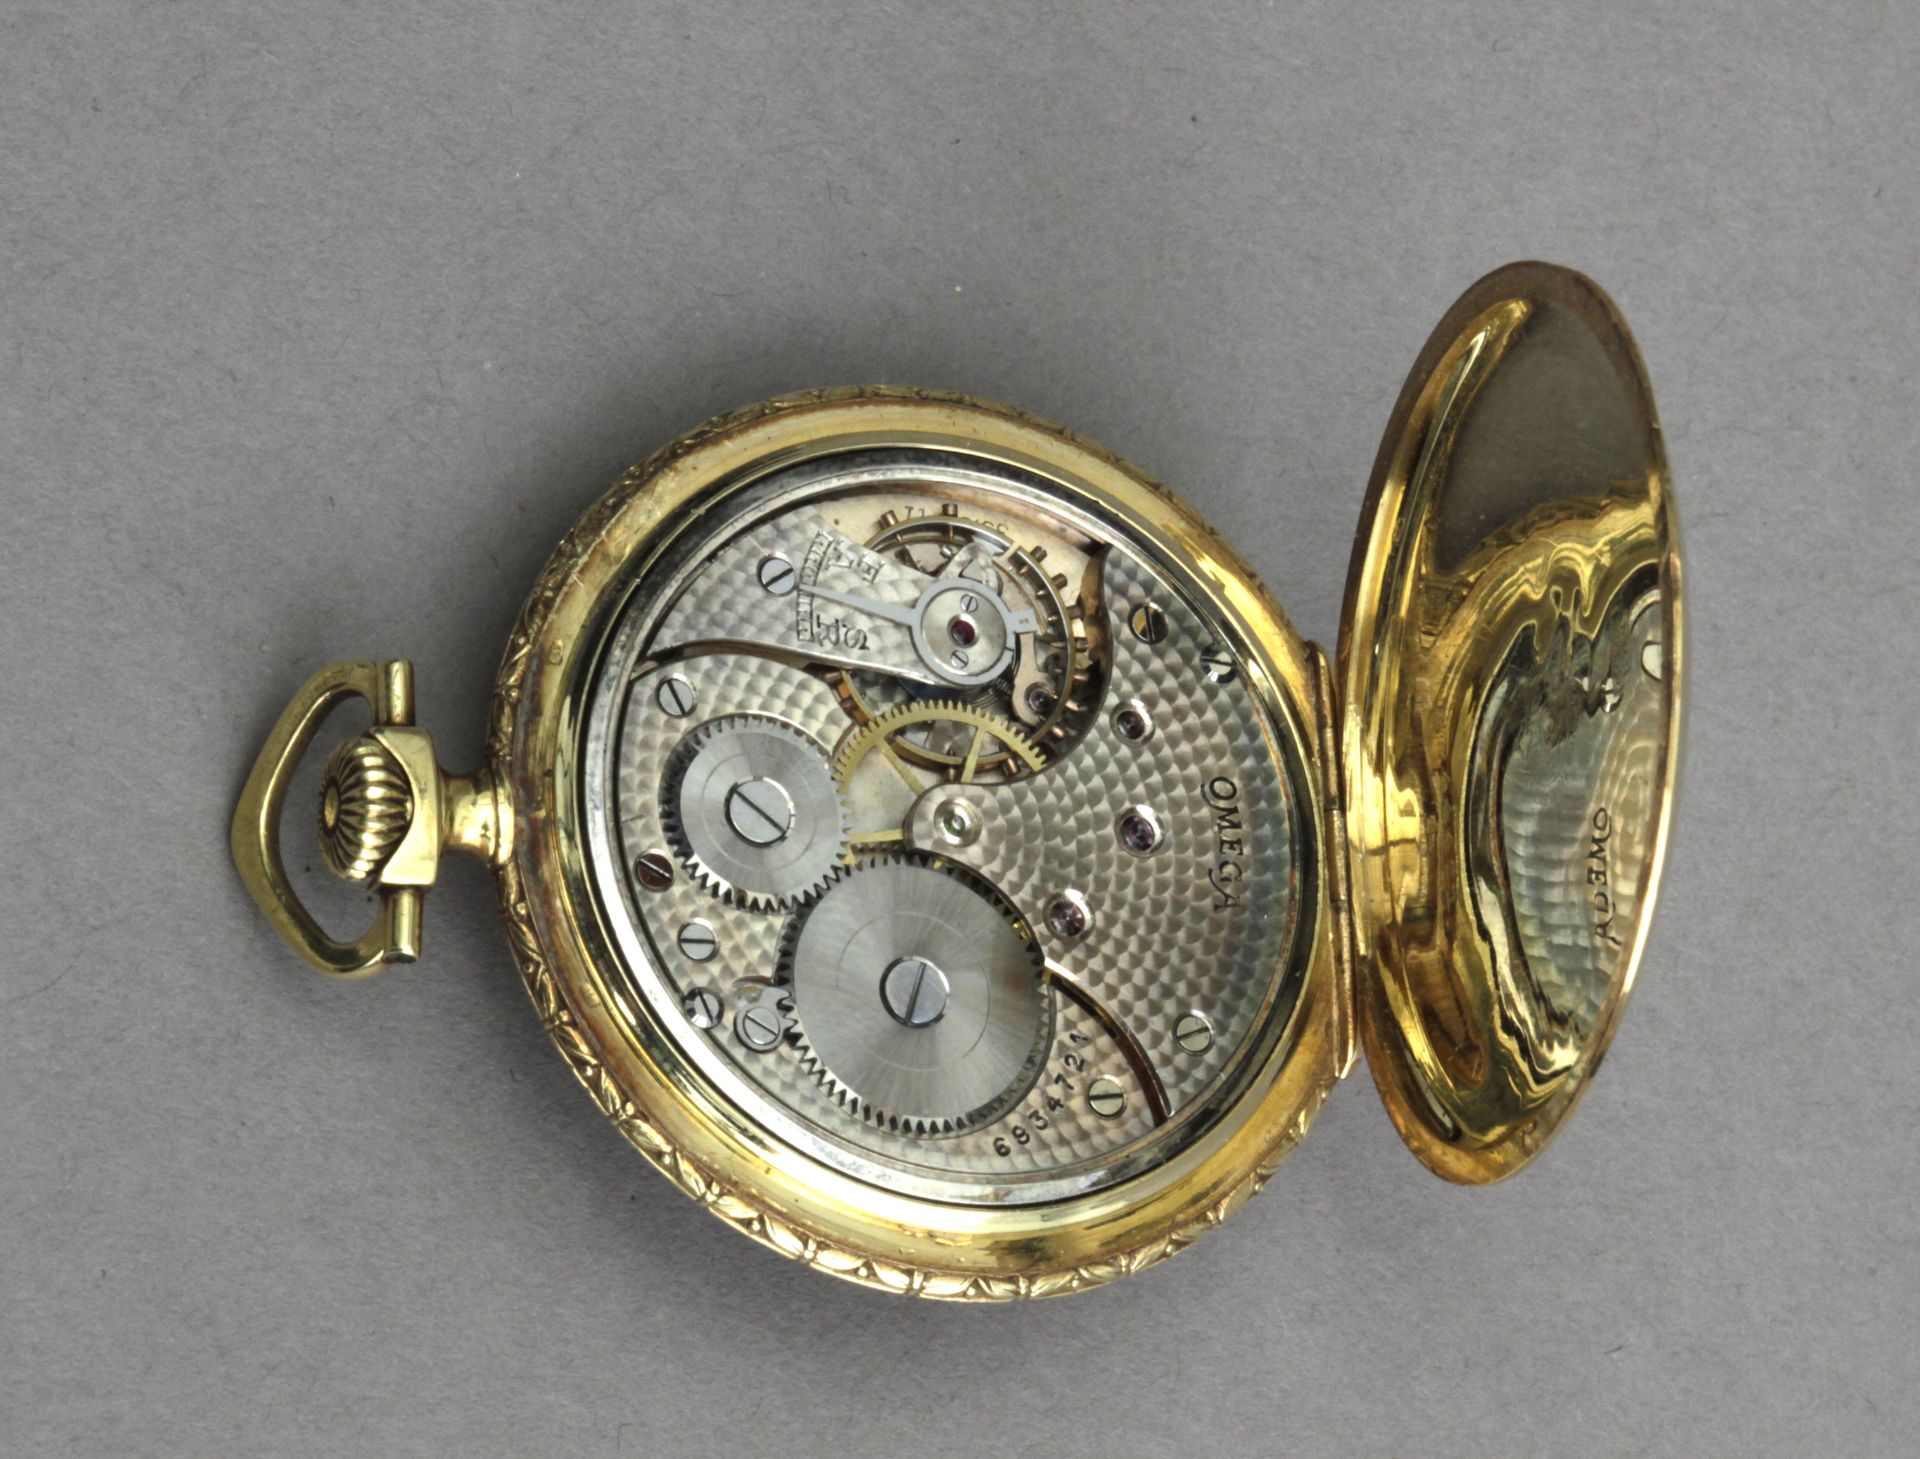 Omega. An 18k. yellow gold open face pocket watch - Image 3 of 6